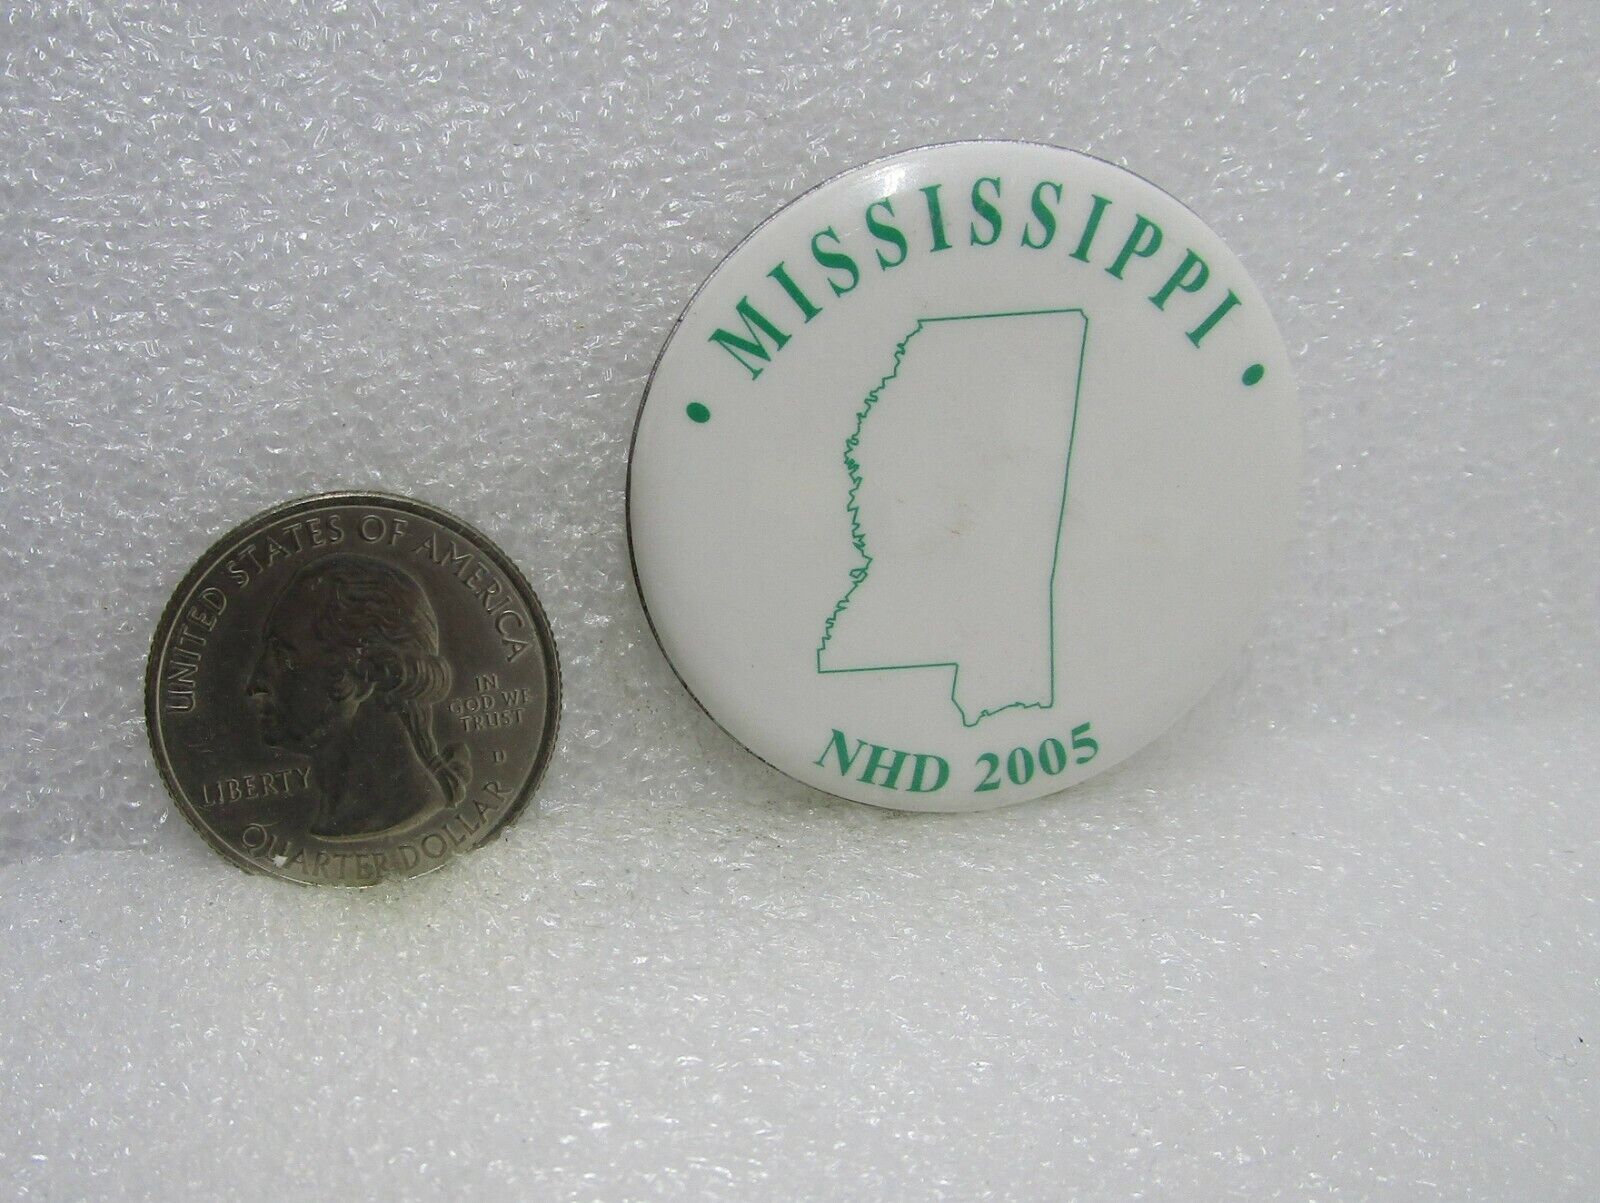 2005 Mississippi National History Day Button Pin